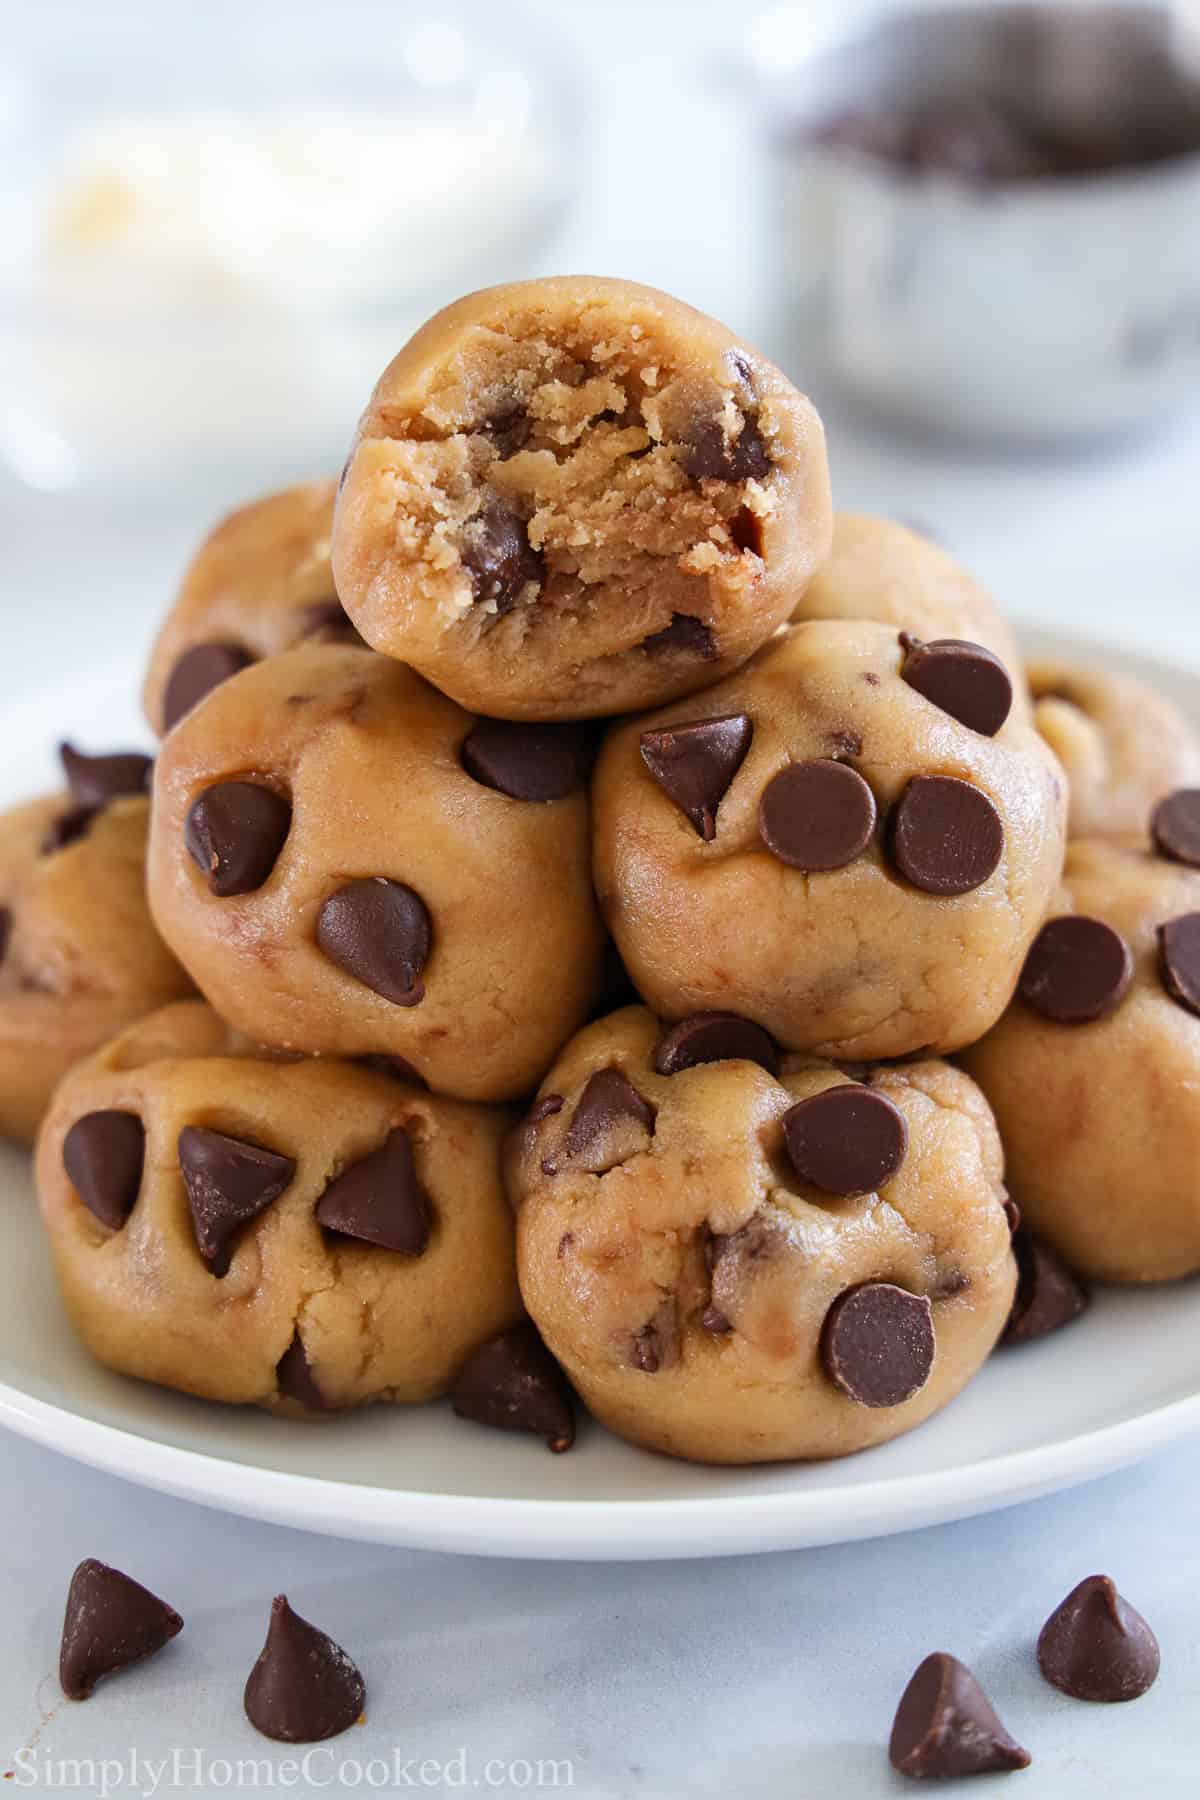 Closeup of a pile of balls of Edible Cookie Dough, the top one missing a bite.